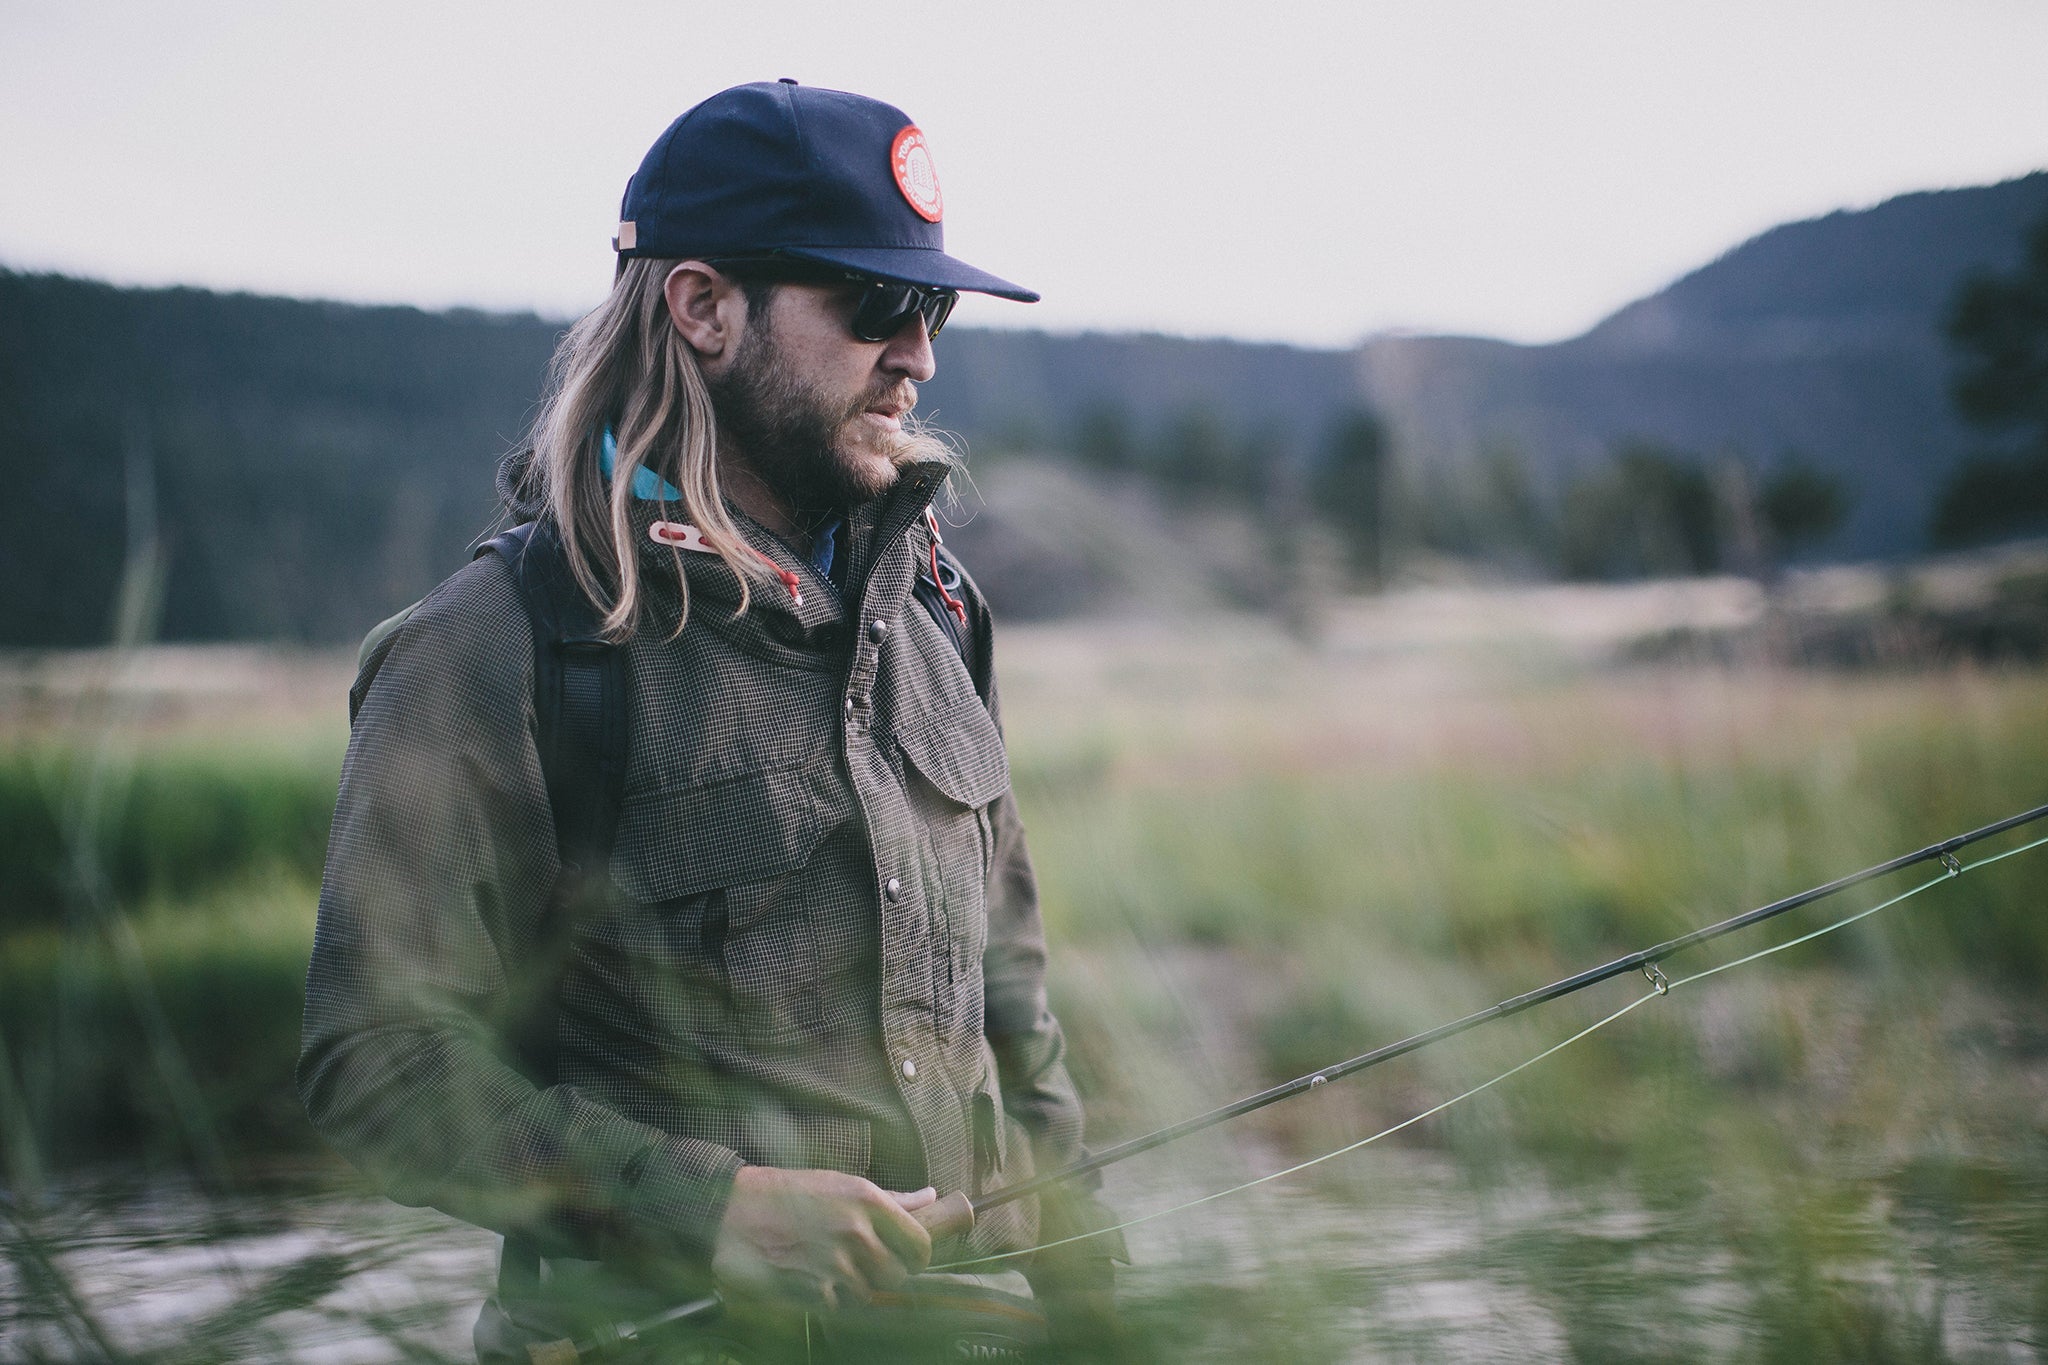 Topo Designs and Tenkara Rod Co. Bring Serious Style to the Water